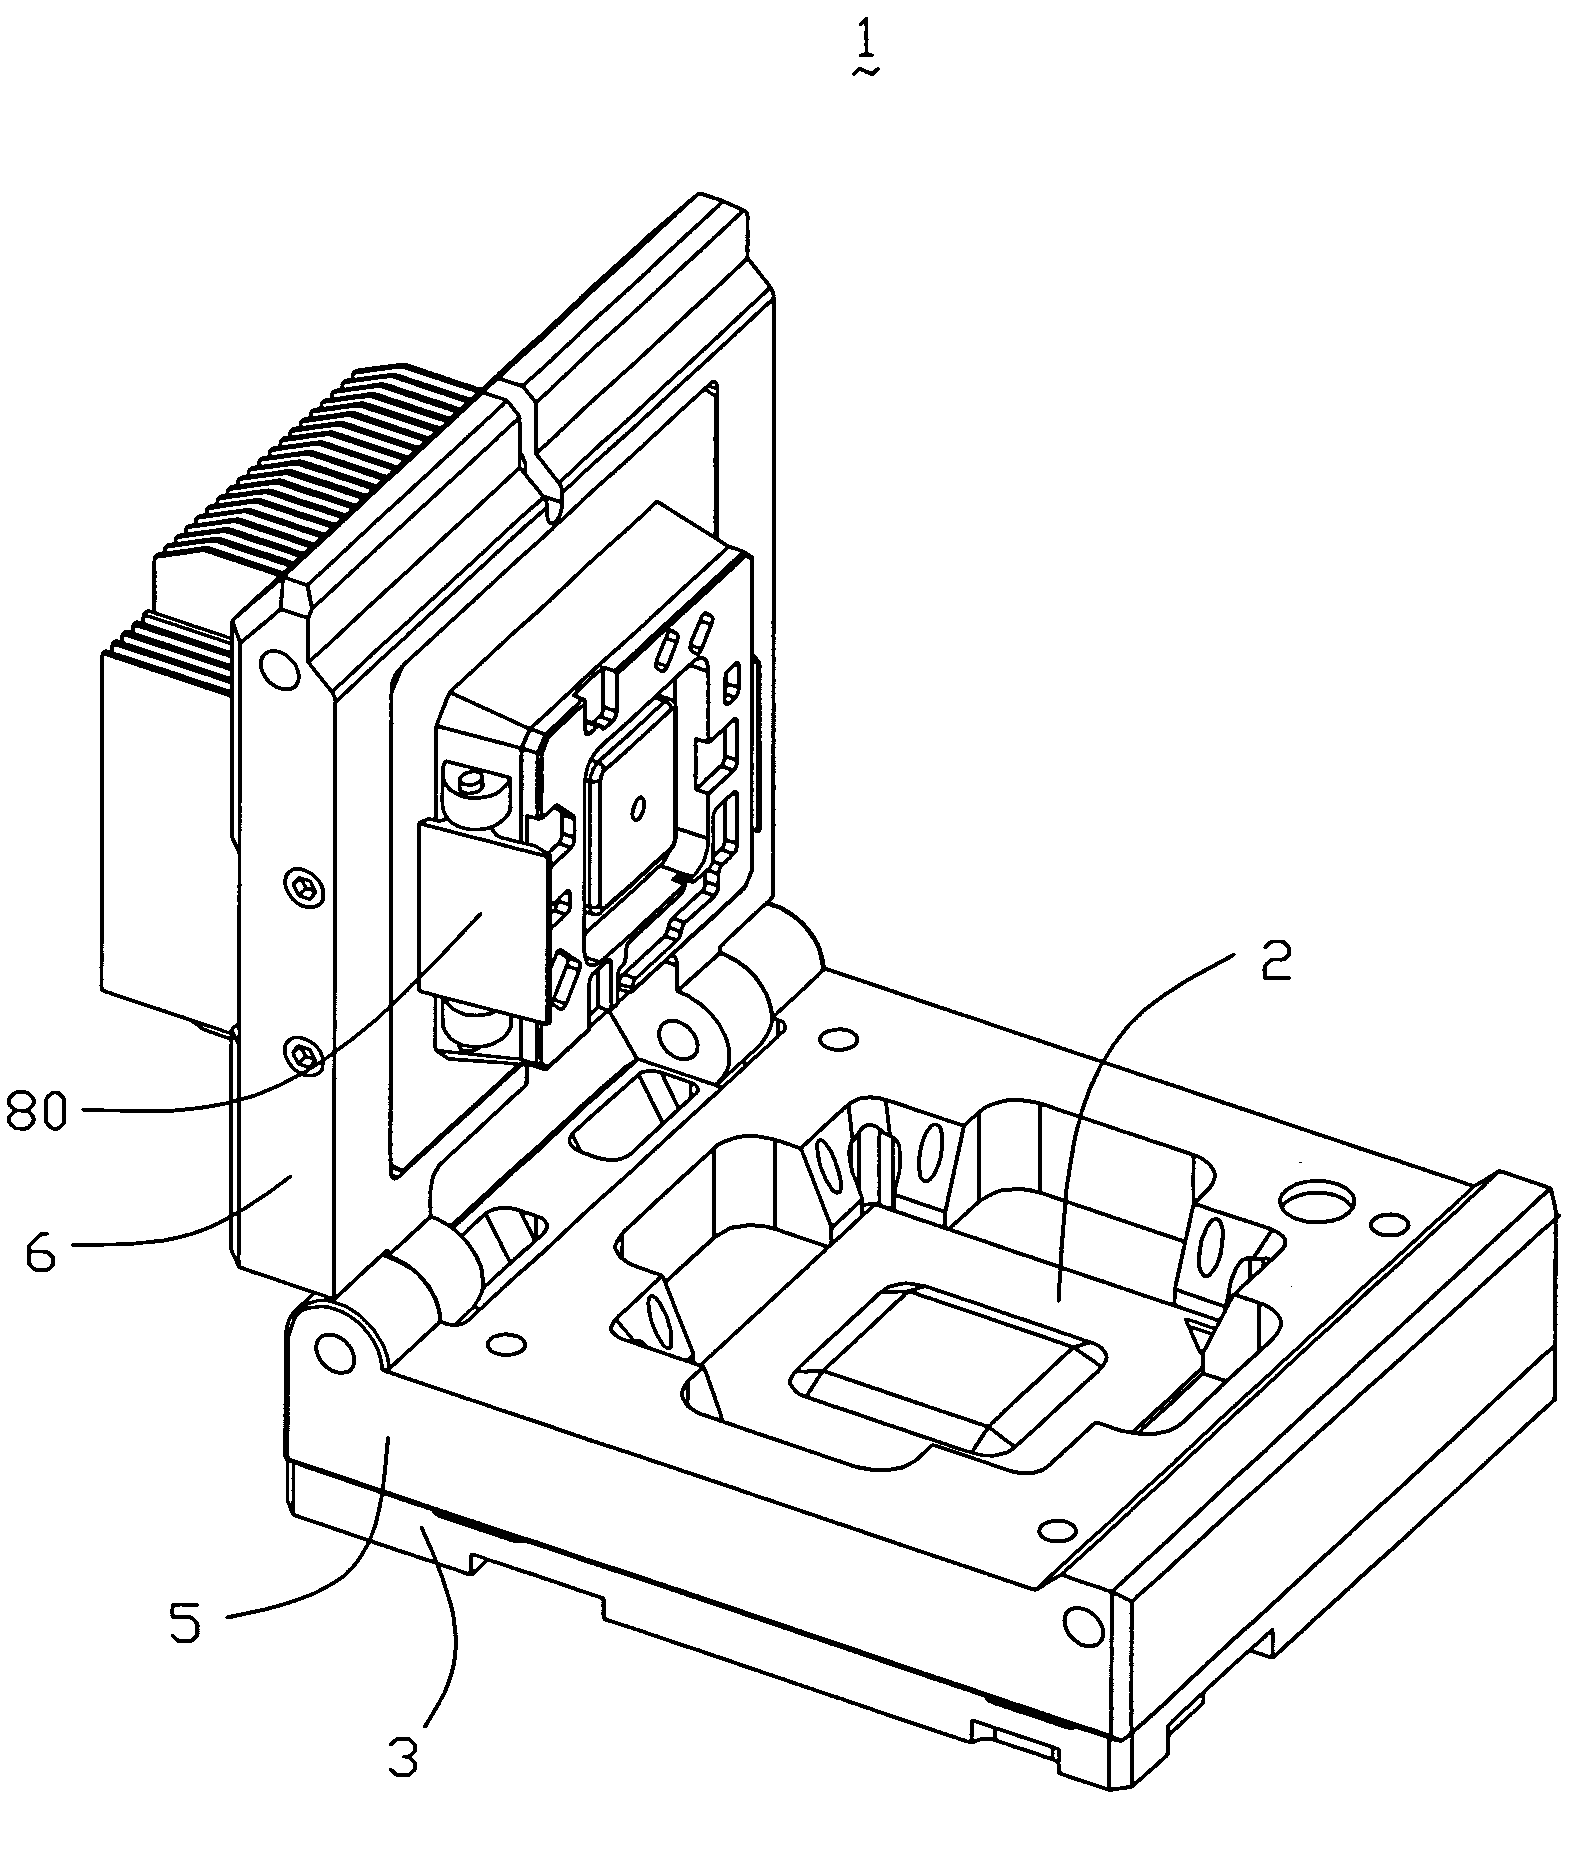 Burn-in socket having pick-up arrangement for quickly pick-up IC package after IC package is tested